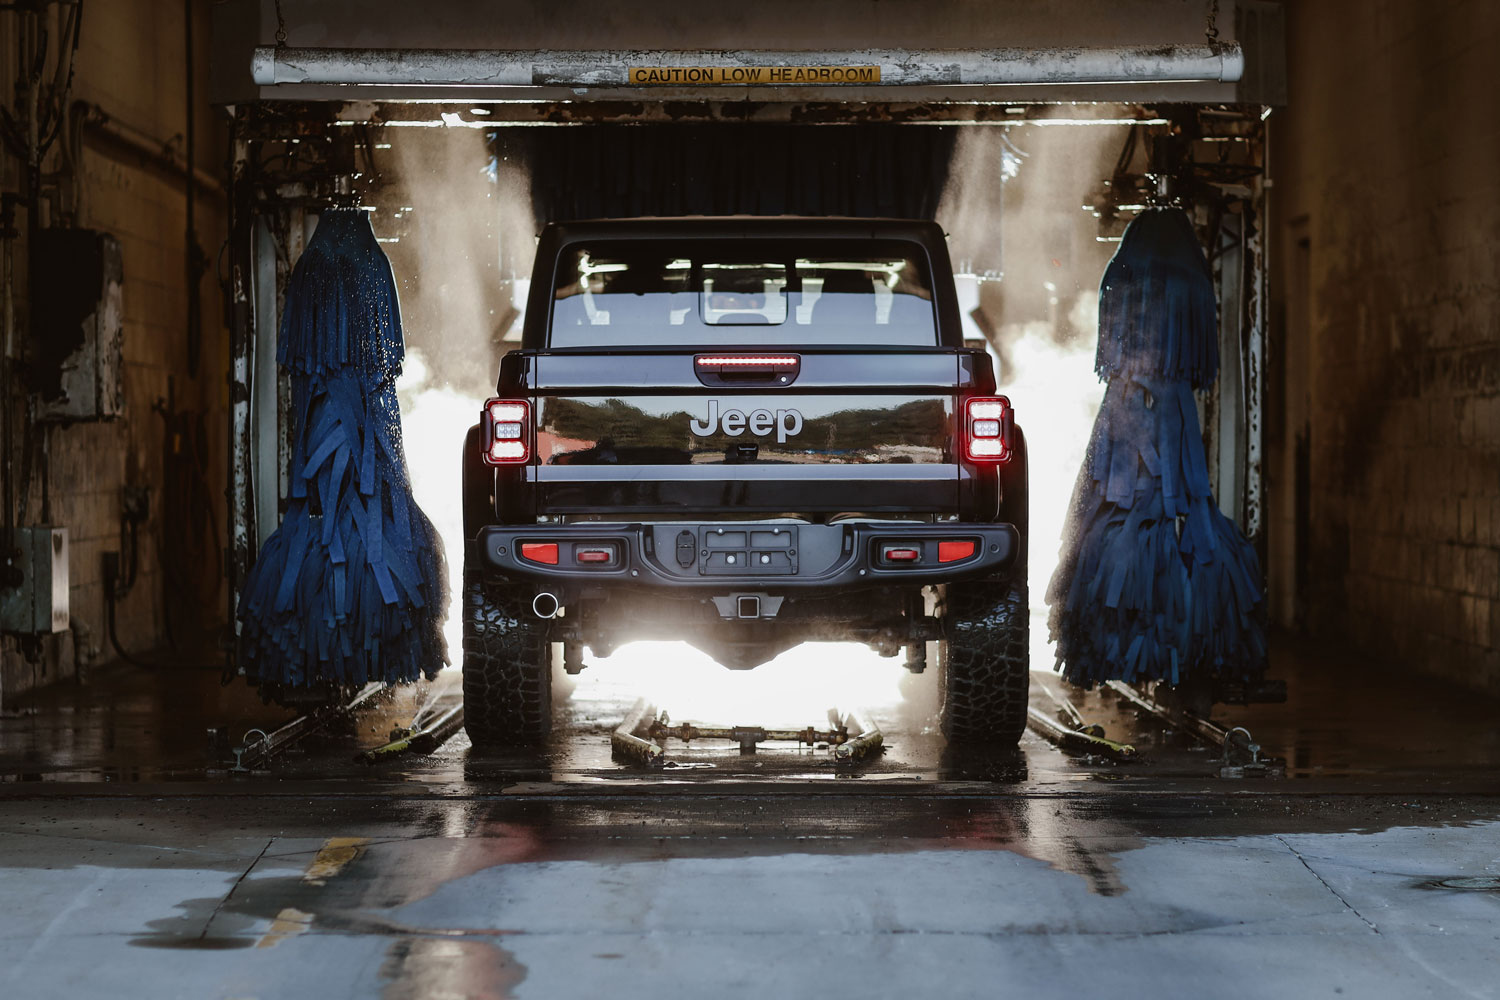 Image of a black Jeep in the car wash